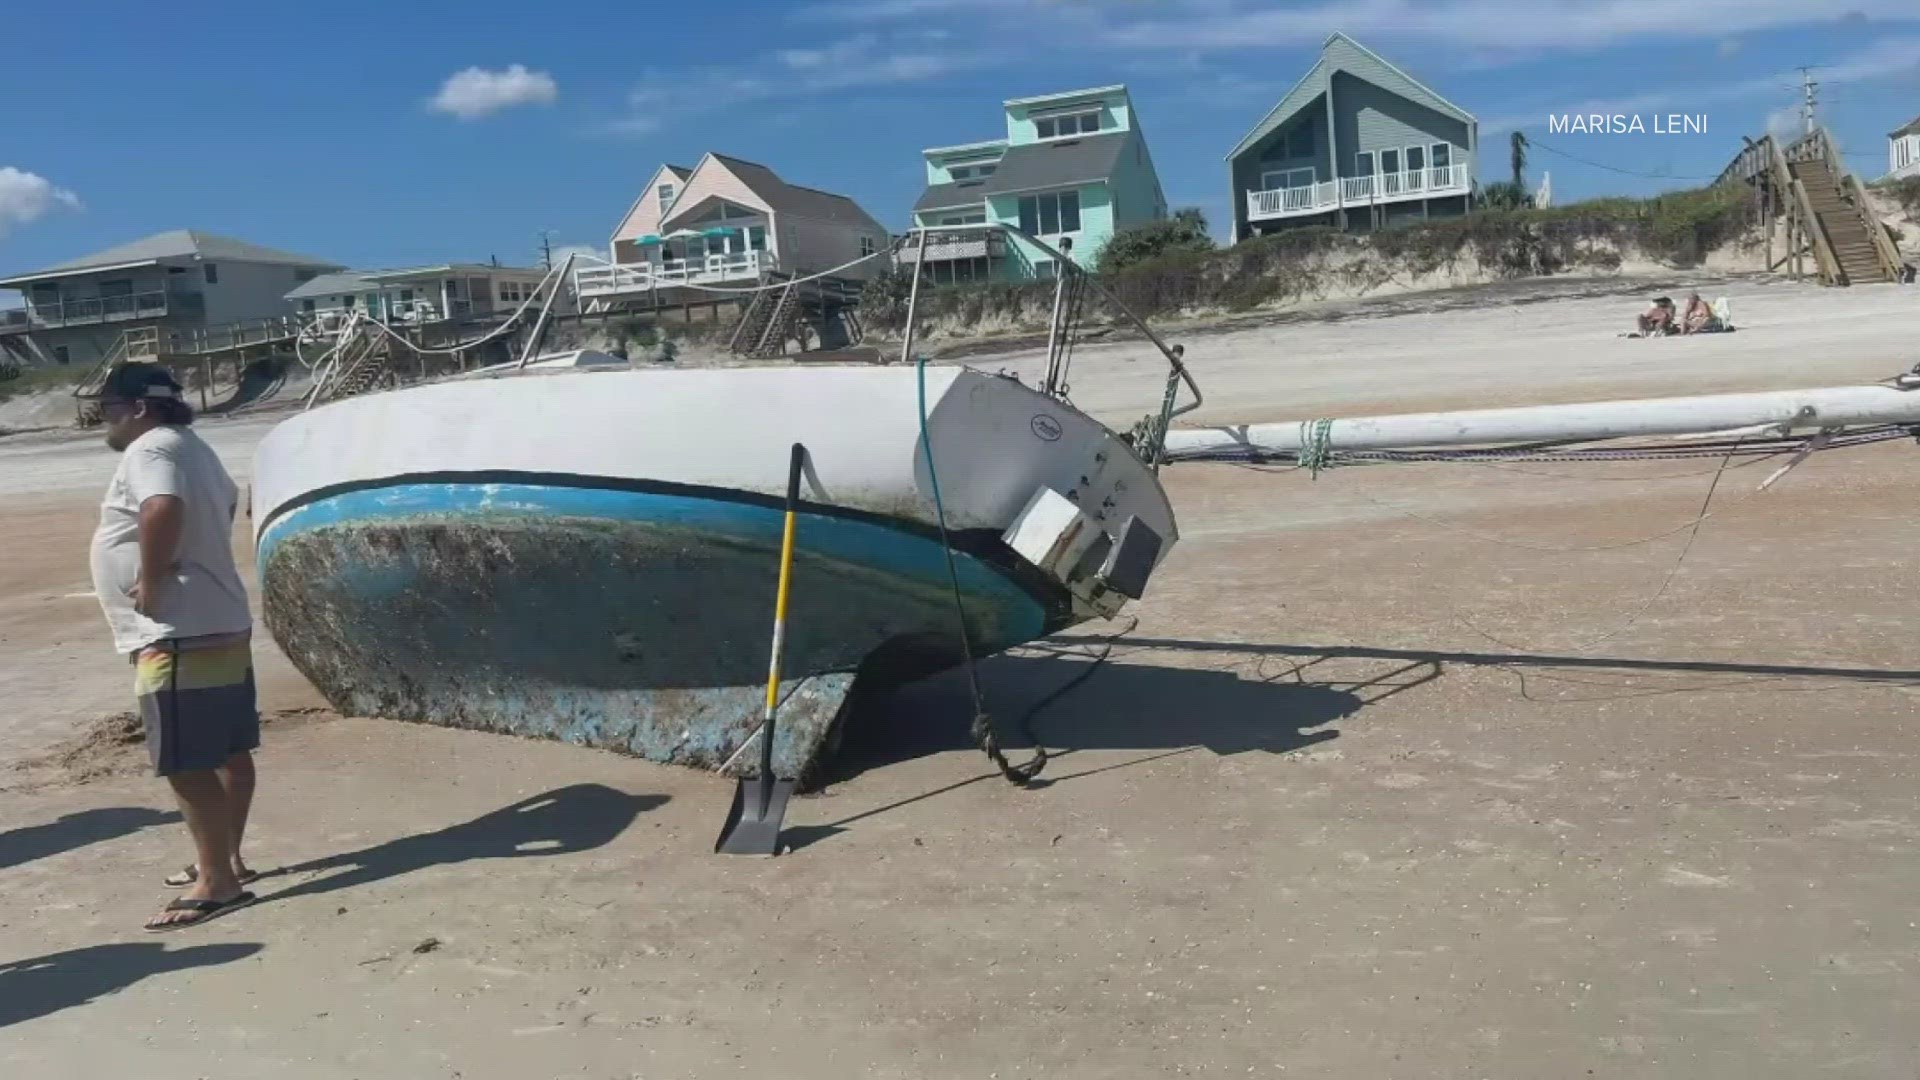 Owners said, "We definitely think that someone pirated our project sailboat."